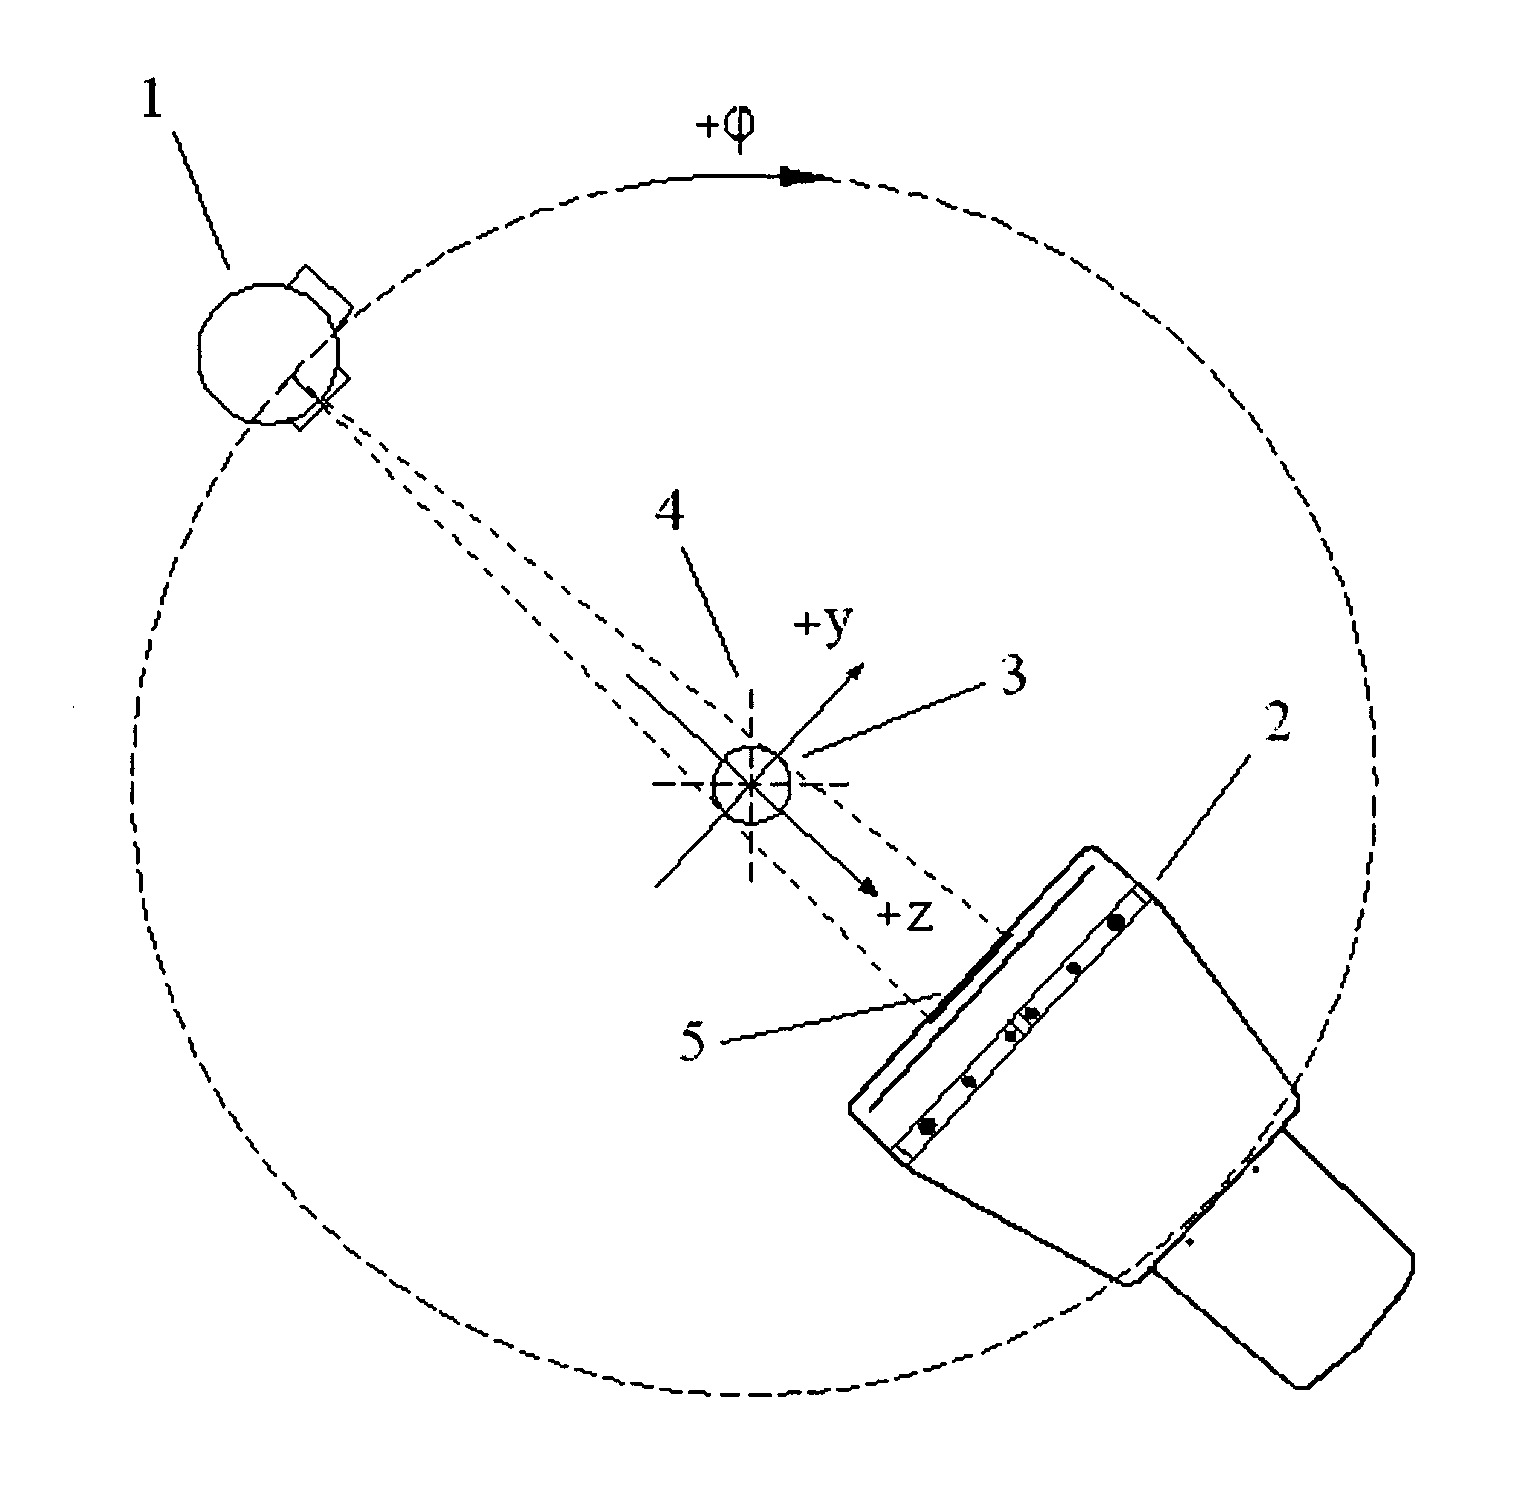 Method of calibration of digital X-ray apparatus and its embodiments